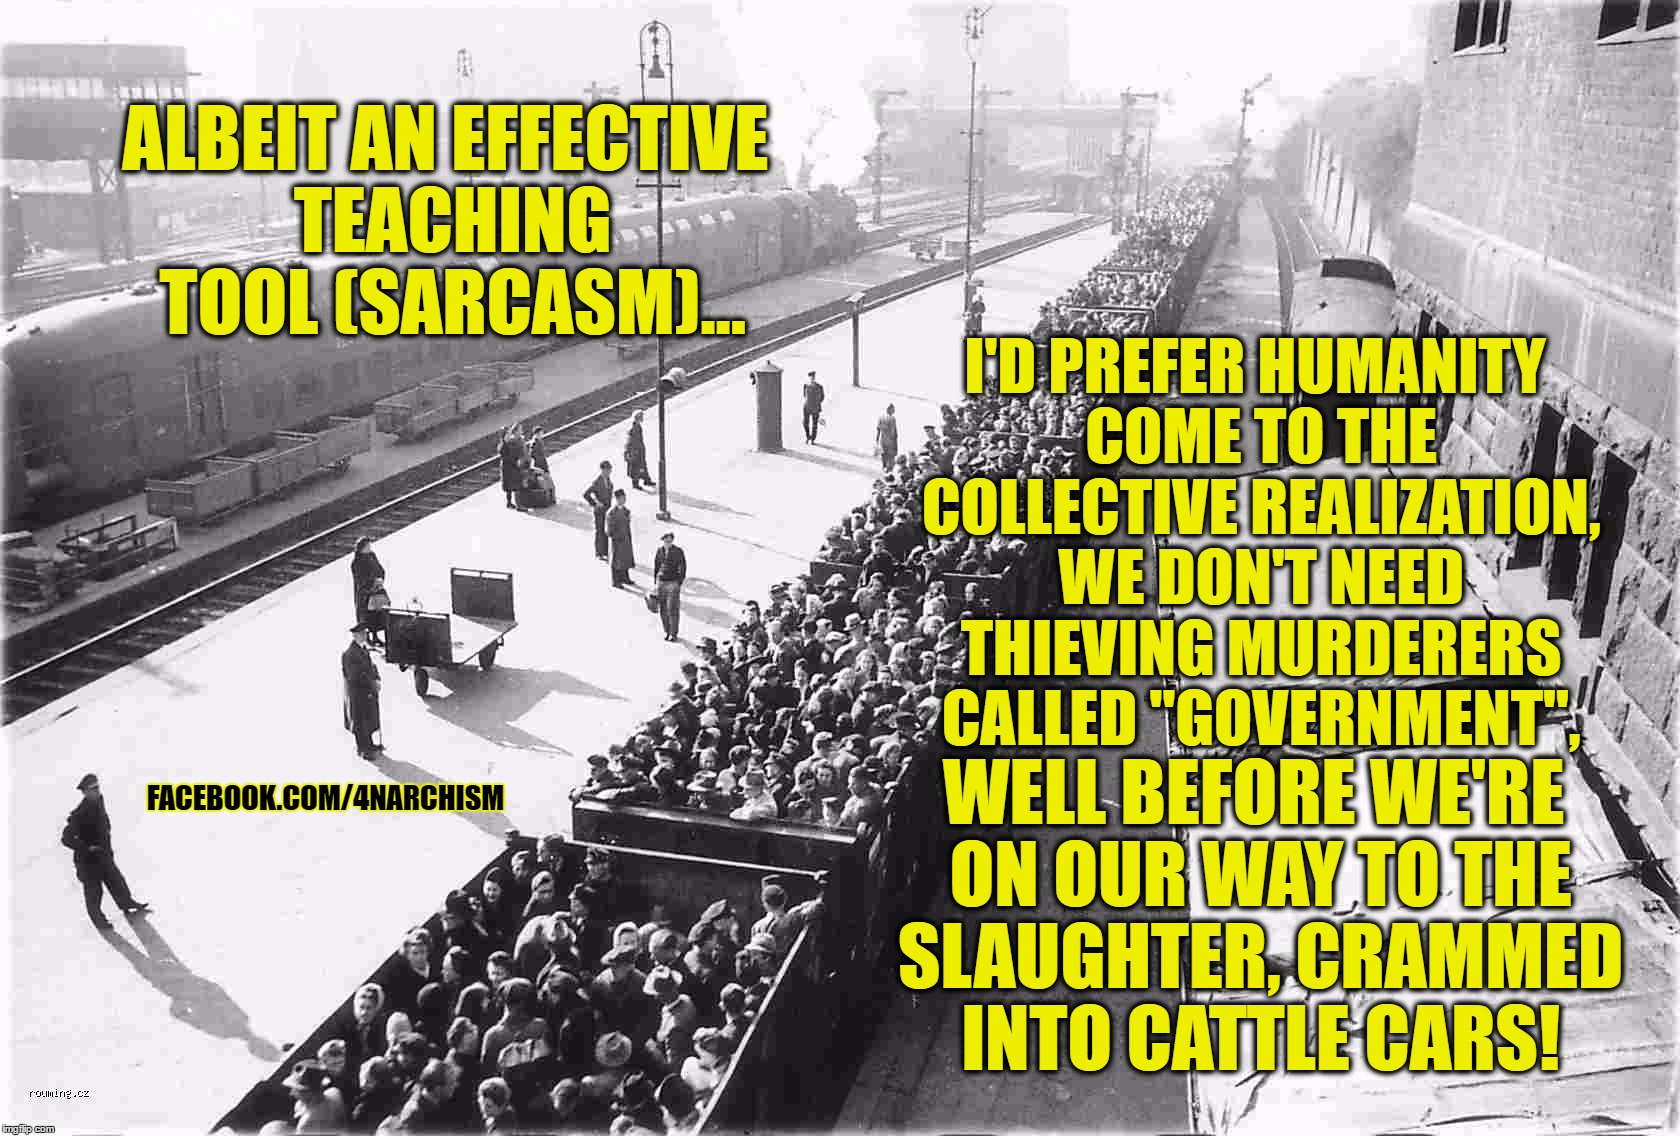 cattle cars | ALBEIT AN EFFECTIVE TEACHING TOOL (SARCASM)... I'D PREFER HUMANITY COME TO THE COLLECTIVE REALIZATION, WE DON'T NEED THIEVING MURDERERS CALLED "GOVERNMENT", WELL BEFORE WE'RE ON OUR WAY TO THE SLAUGHTER, CRAMMED INTO CATTLE CARS! FACEBOOK.COM/4NARCHISM | image tagged in cattle cars | made w/ Imgflip meme maker